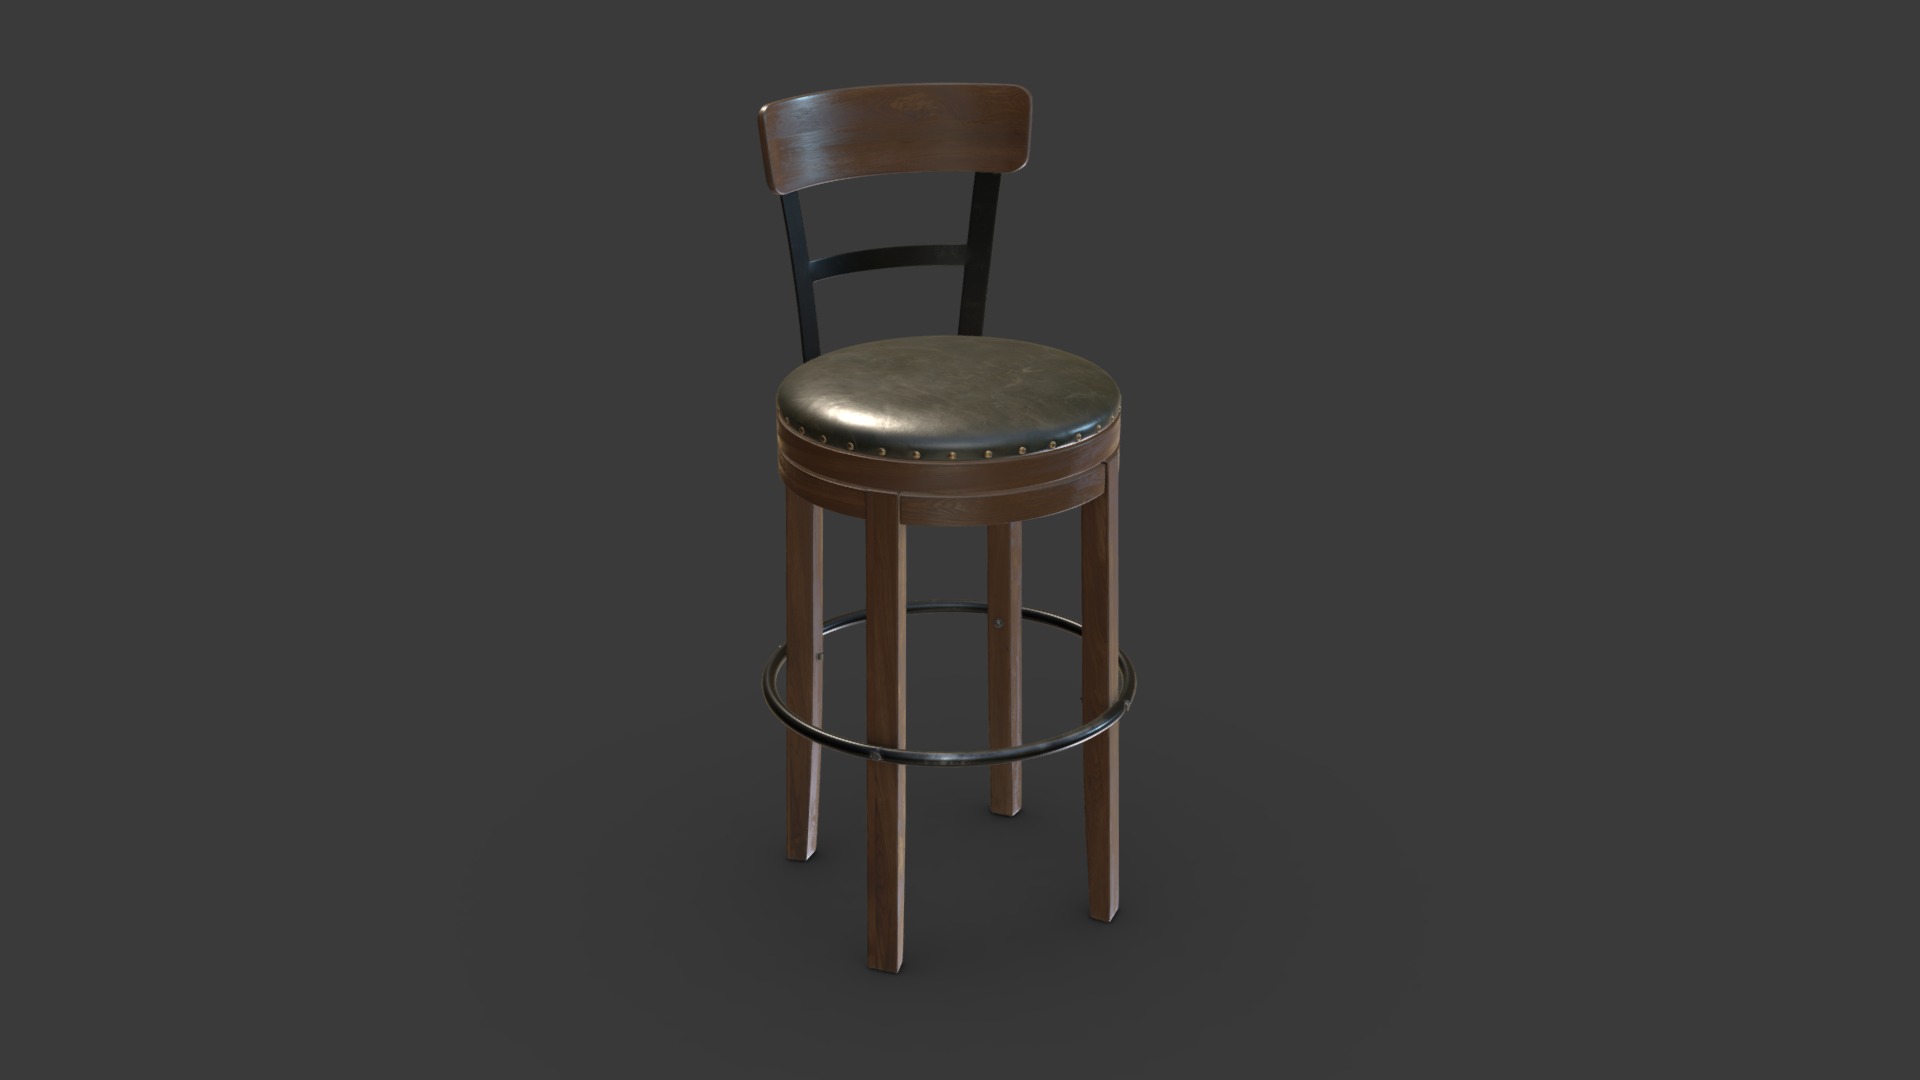 3D model Pinnadel Bar Height Bar Stool D542-130 - This is a 3D model of the Pinnadel Bar Height Bar Stool D542-130. The 3D model is about a chair with a cushion.